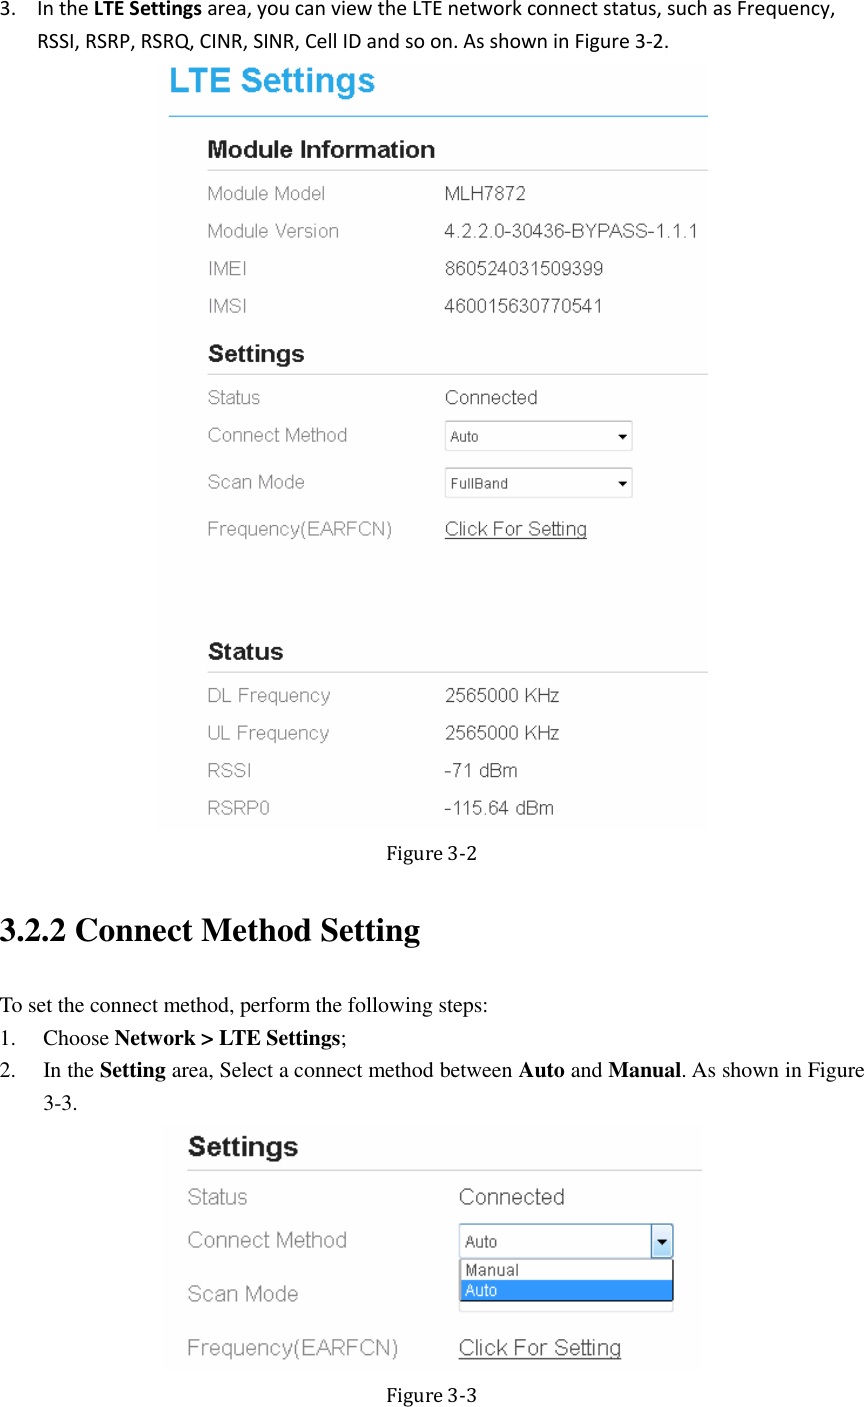   3. In the LTE Settings area, you can view the LTE network connect status, such as Frequency, RSSI, RSRP, RSRQ, CINR, SINR, Cell ID and so on. As shown in Figure 3-2.  Figure 3-2 3.2.2 Connect Method Setting To set the connect method, perform the following steps: 1. Choose Network &gt; LTE Settings; 2. In the Setting area, Select a connect method between Auto and Manual. As shown in Figure 3-3.  Figure 3-3 